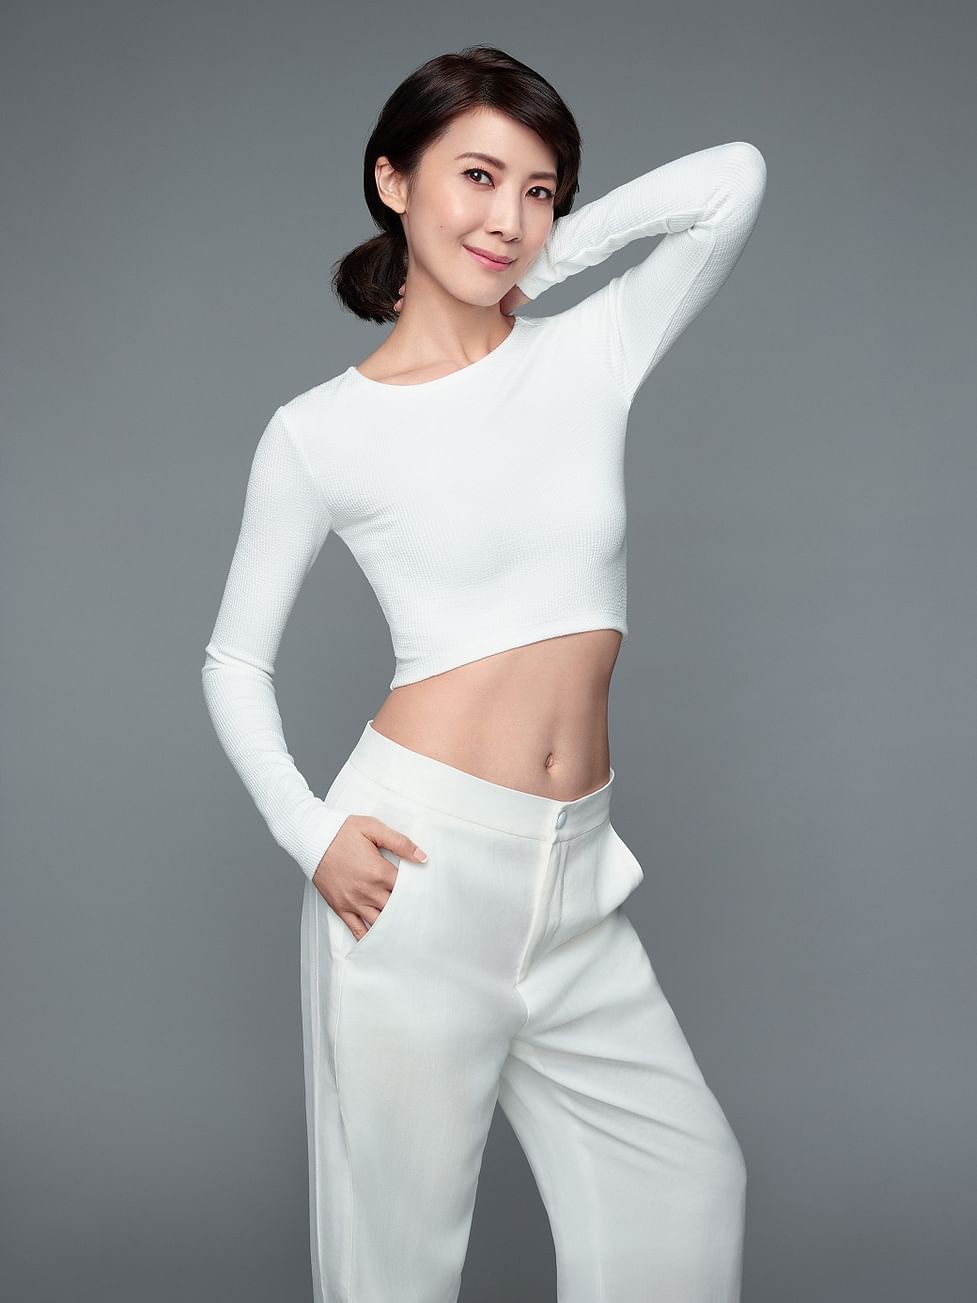 Jeanette Aw's shapely figure is partly thanks to fat-freezing - Her World  Singapore